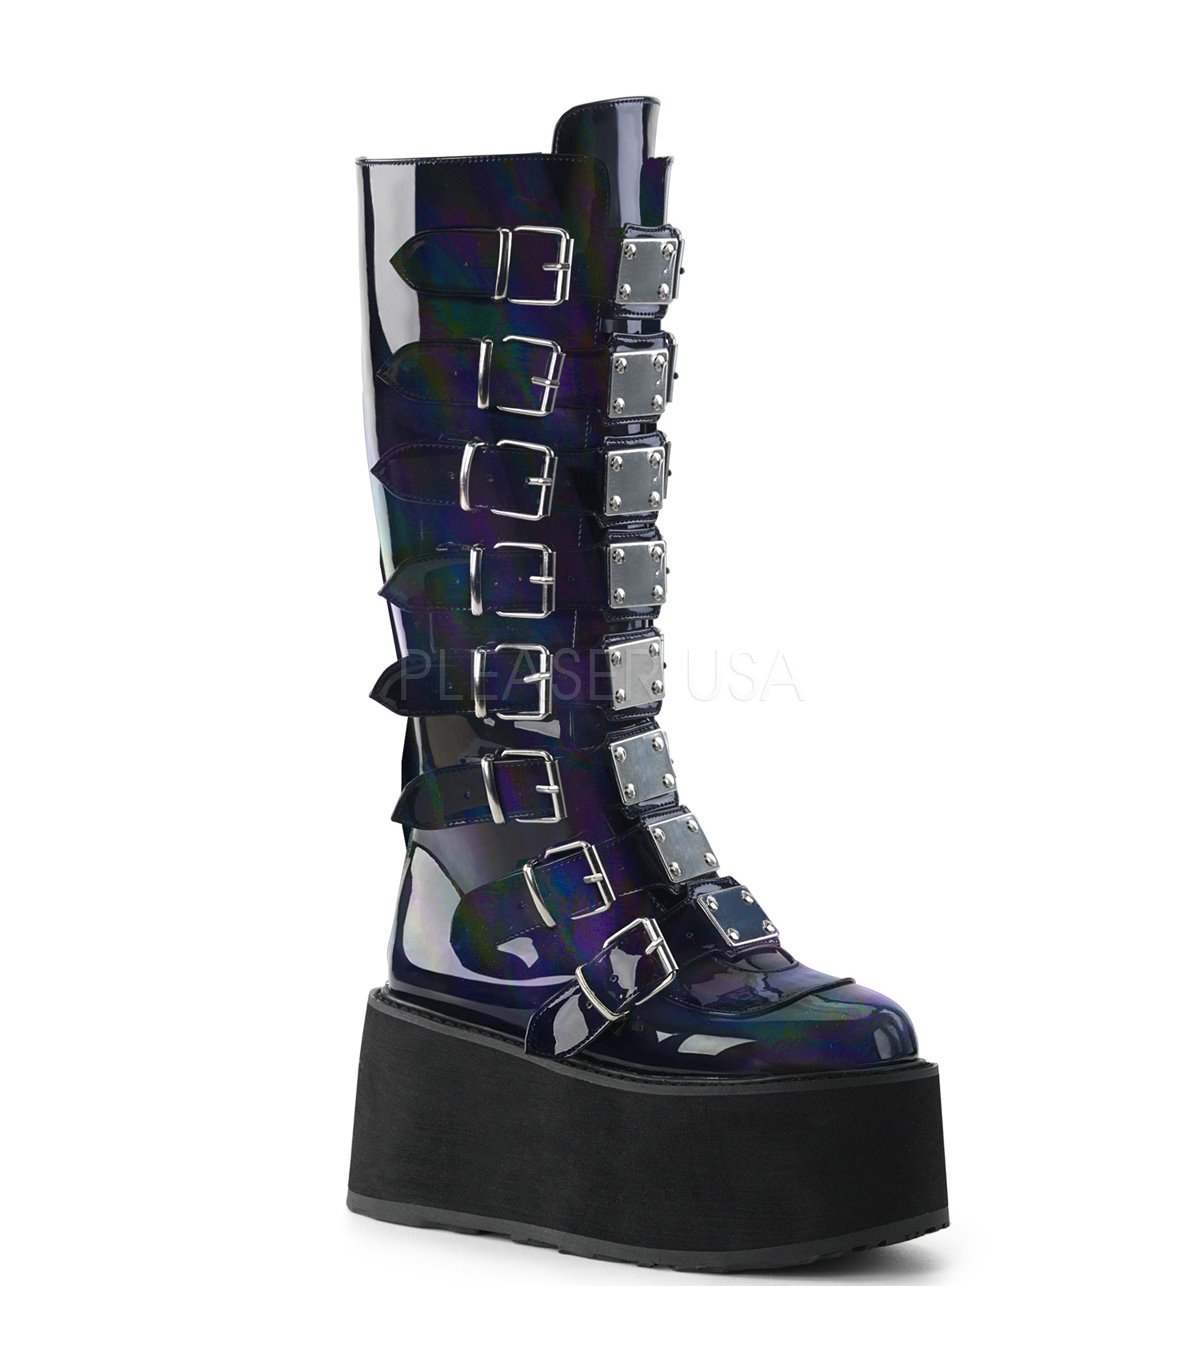 th Modstand dagsorden Demonia Boots Damned 318 Black Holo - Nyctophilia Gothic Shop Hamburg